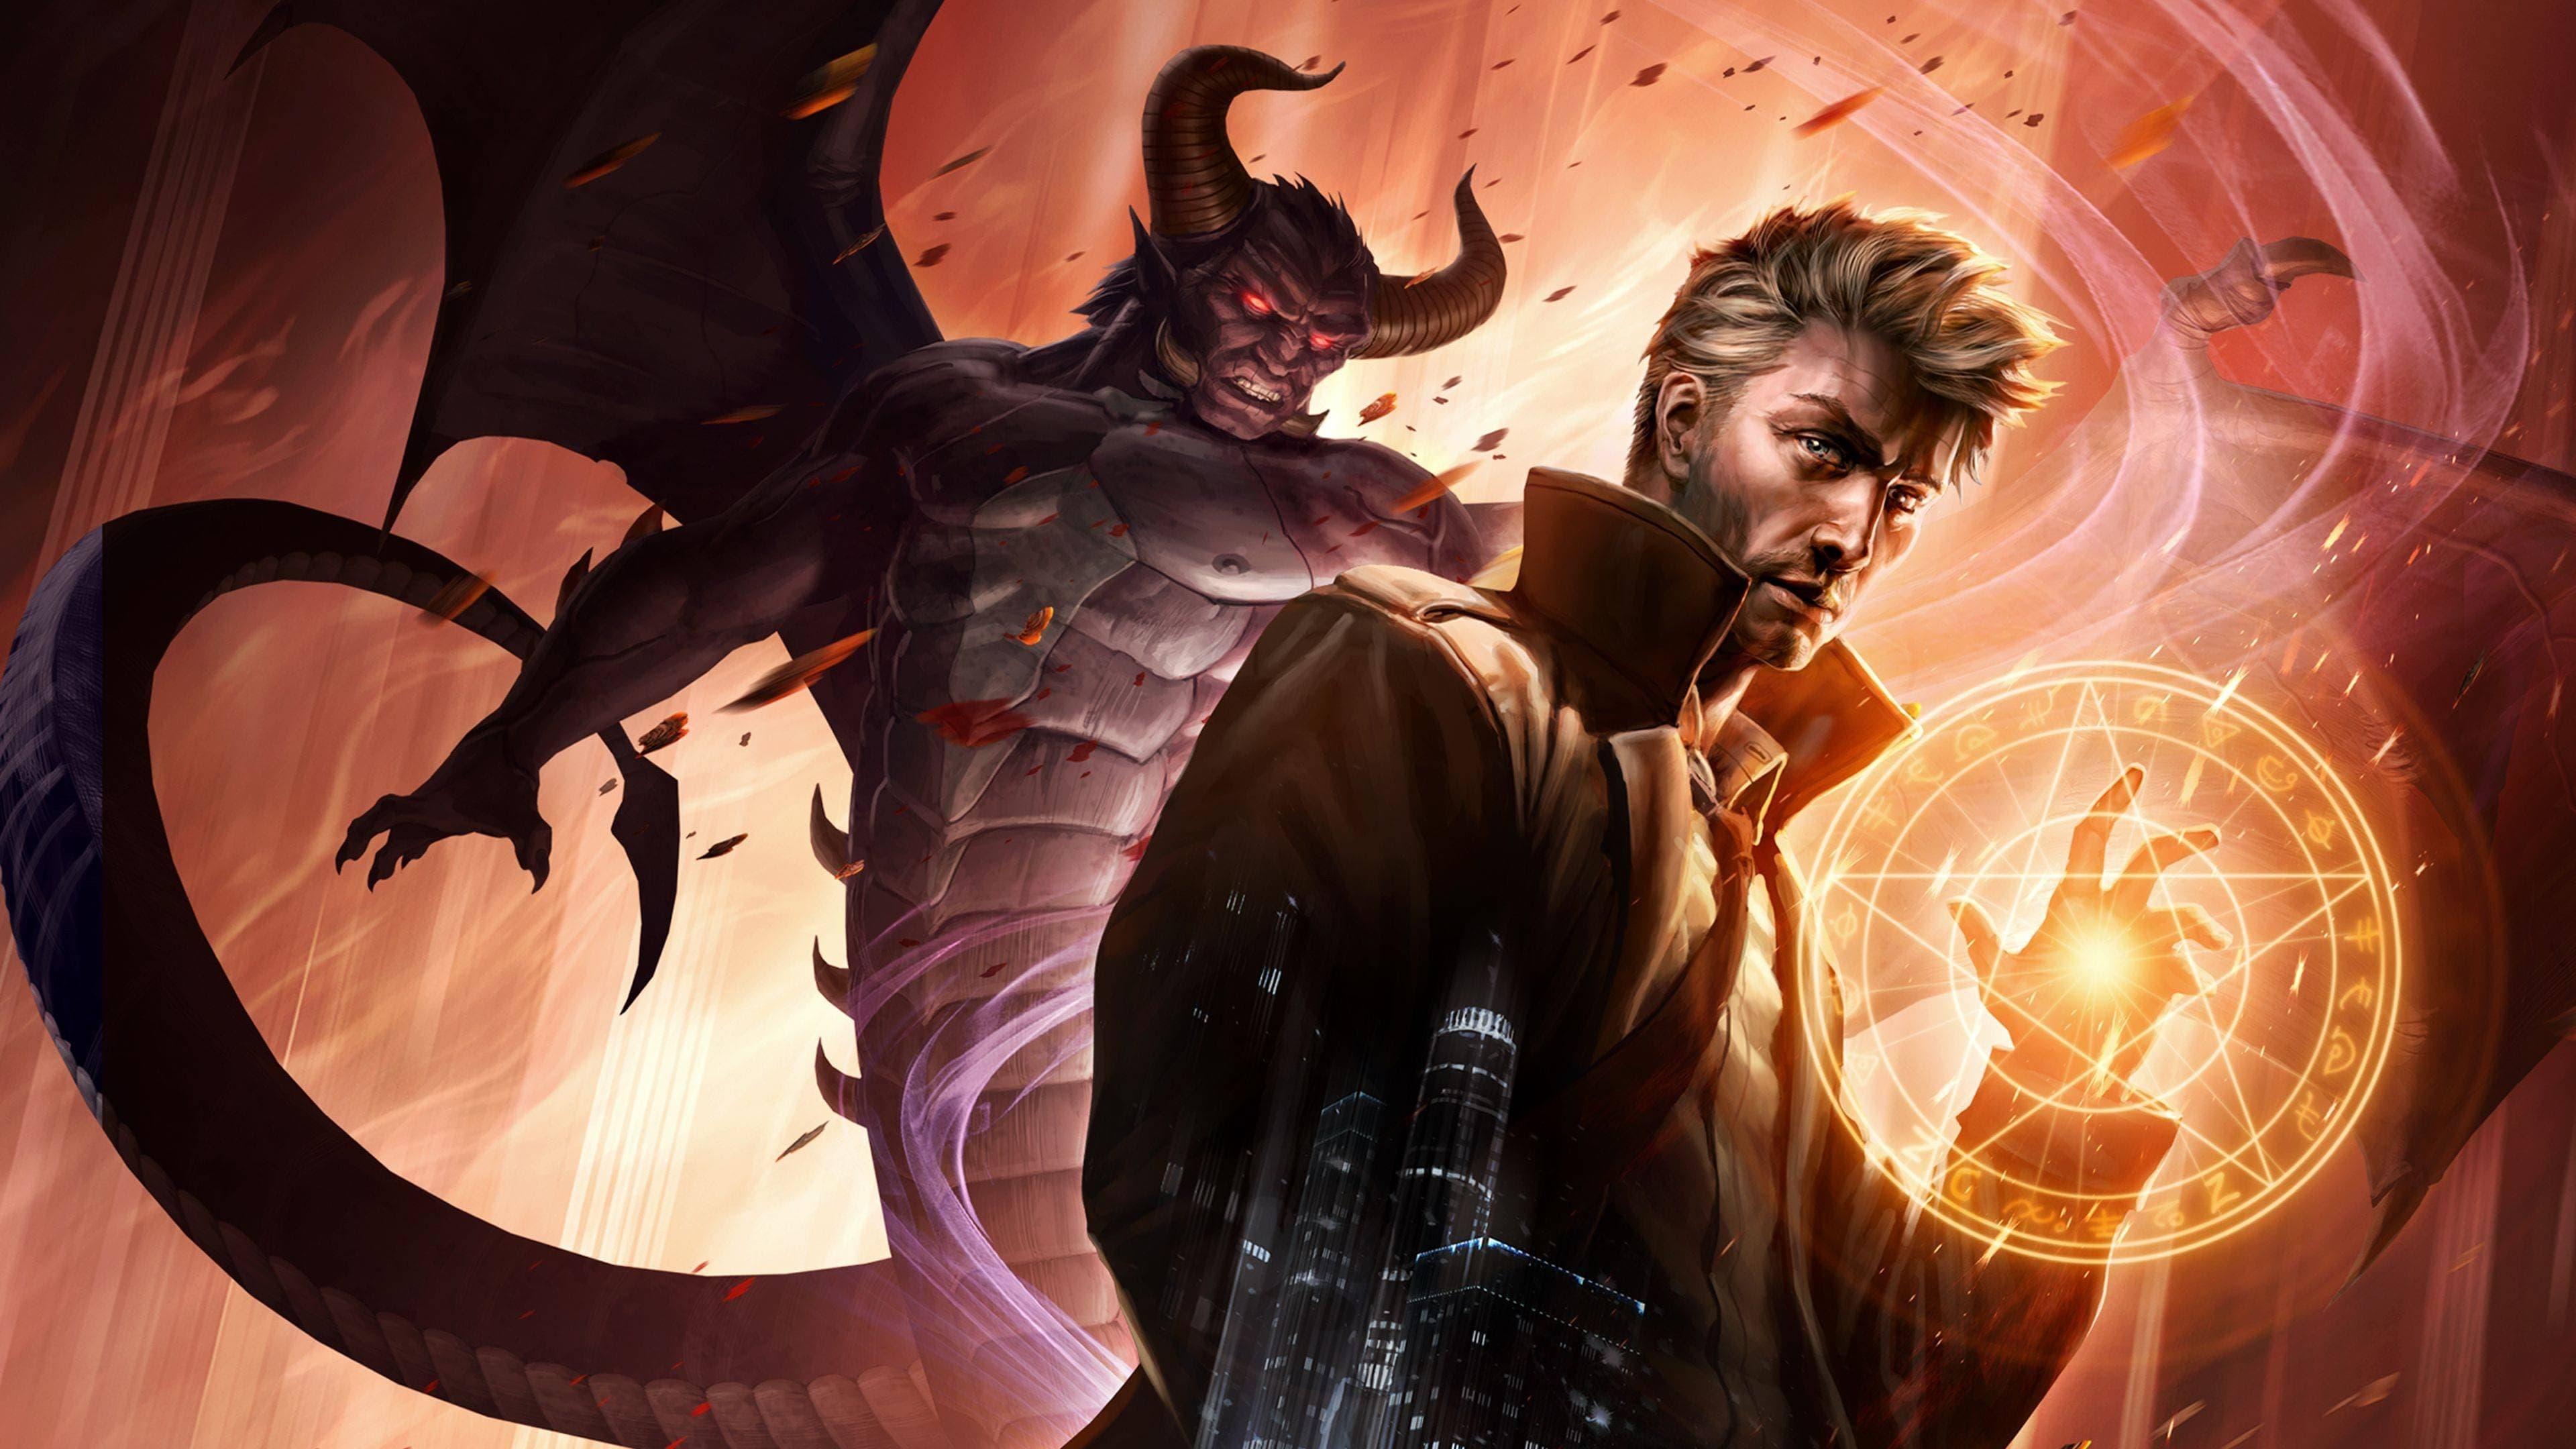 Constantine: City of Demons - The Movie backdrop